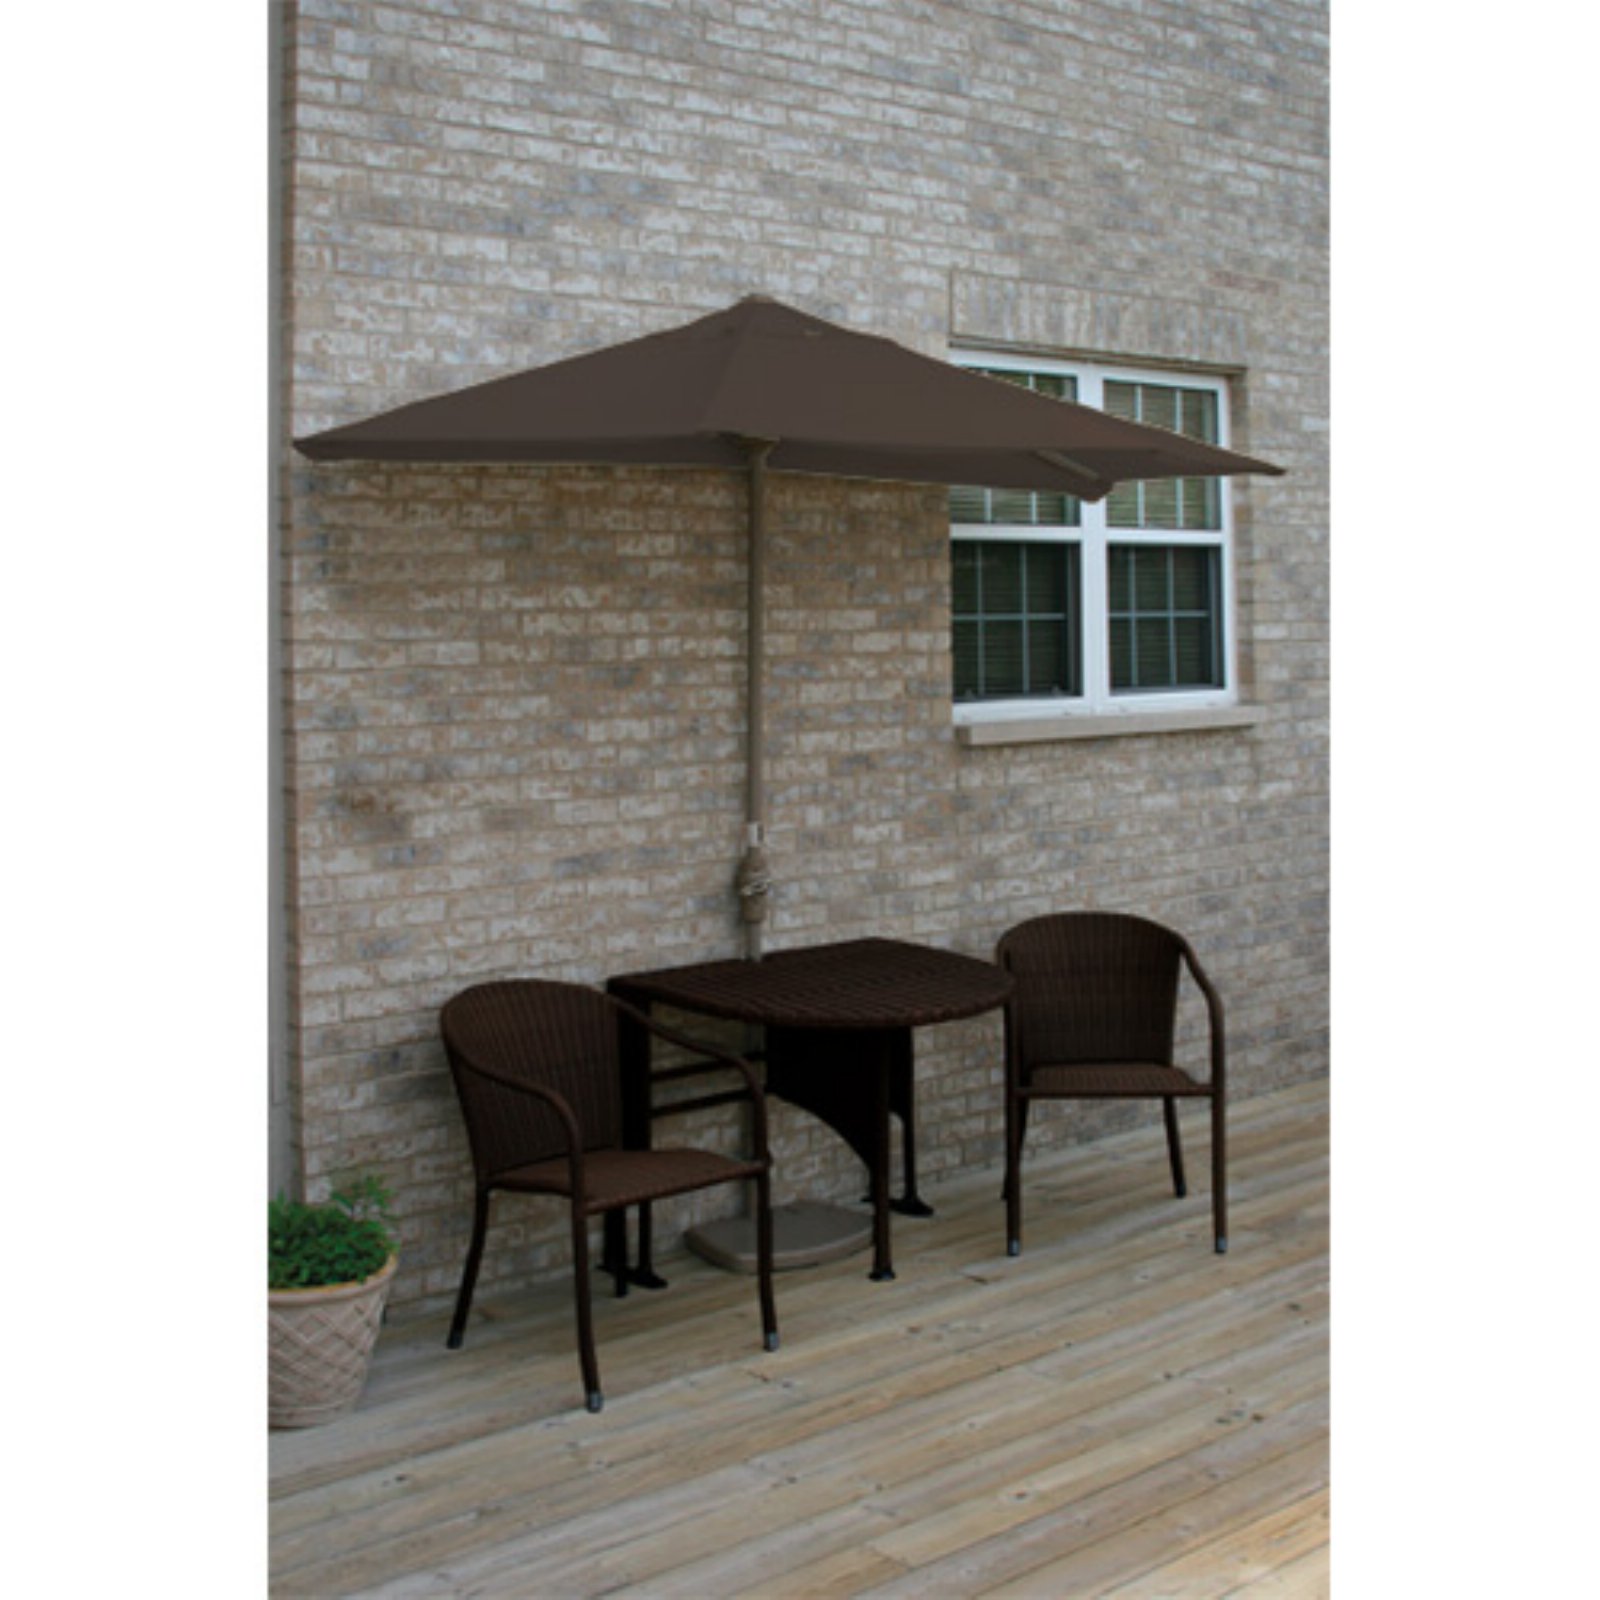 Blue Star Group Terrace Mates Adena All-Weather Wicker Java Color Table Set w/ 9'-Wide OFF-THE-WALL BRELLA - Chocolate Sunbrella Canopy - image 1 of 9